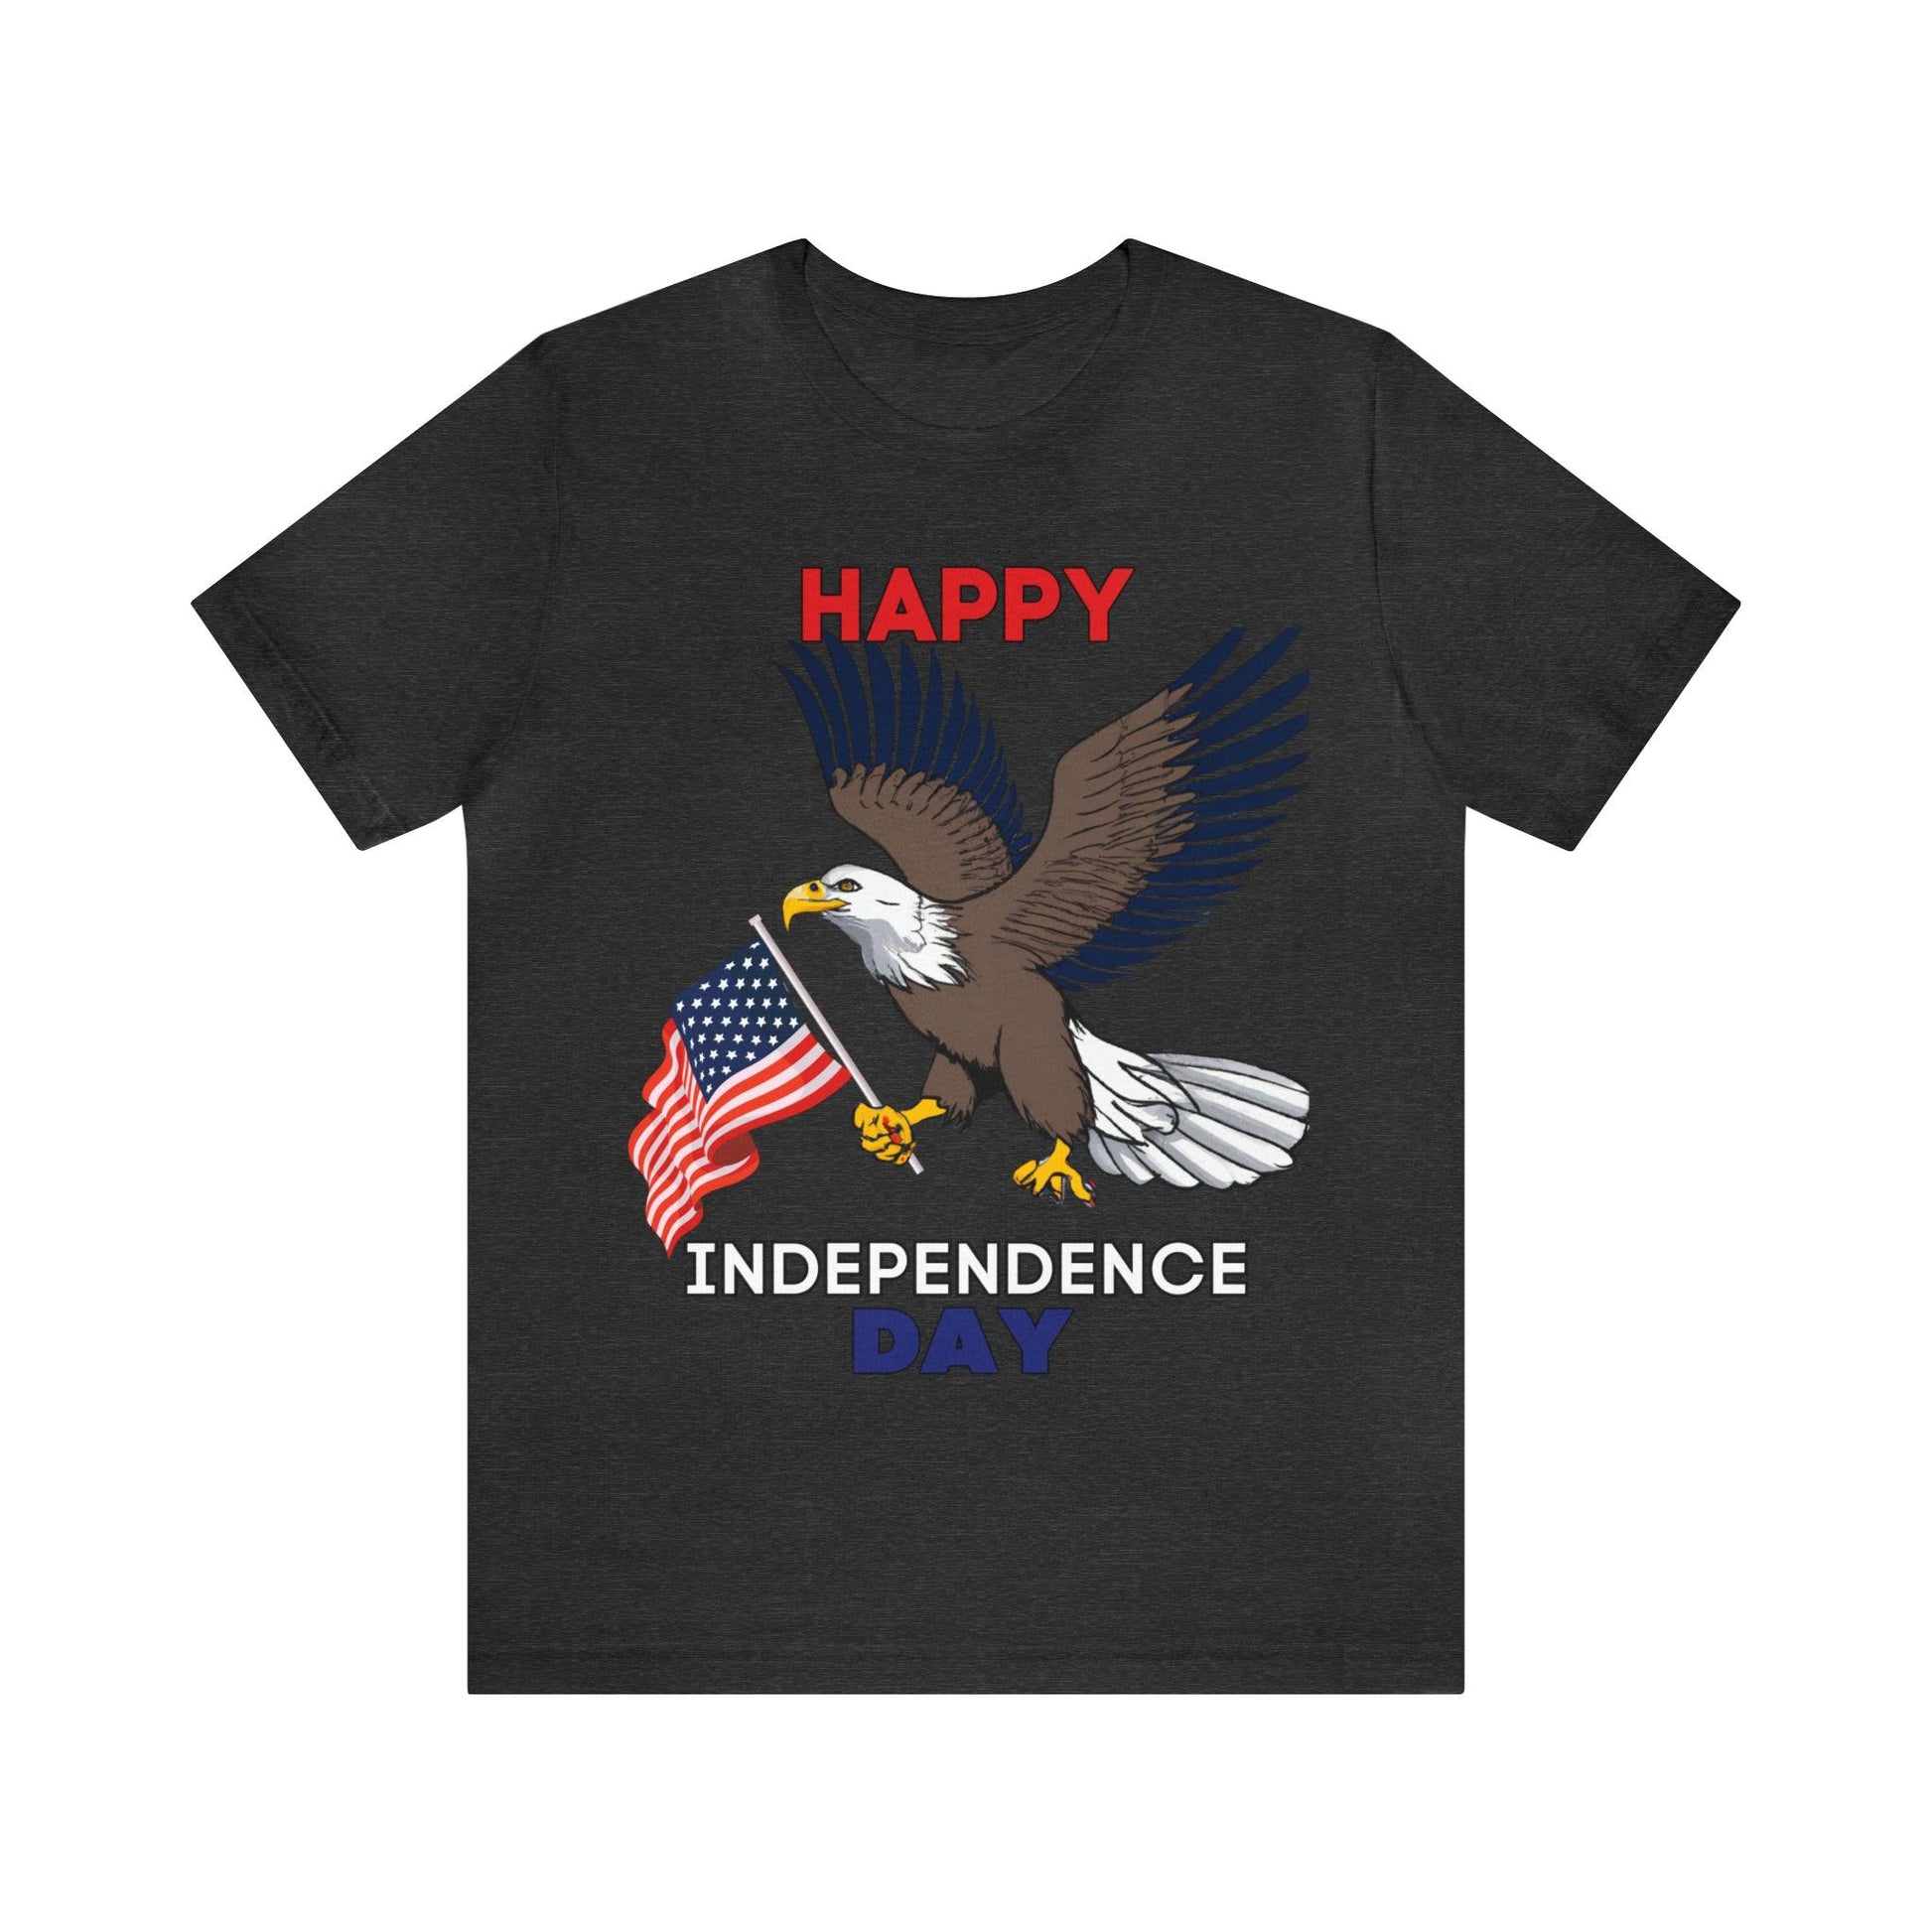 Show Your Patriotic Spirit with Happy Independence Day Shirts for Women and Men: 4th of July, USA Flag, Fireworks, Freedom, and More - Giftsmojo